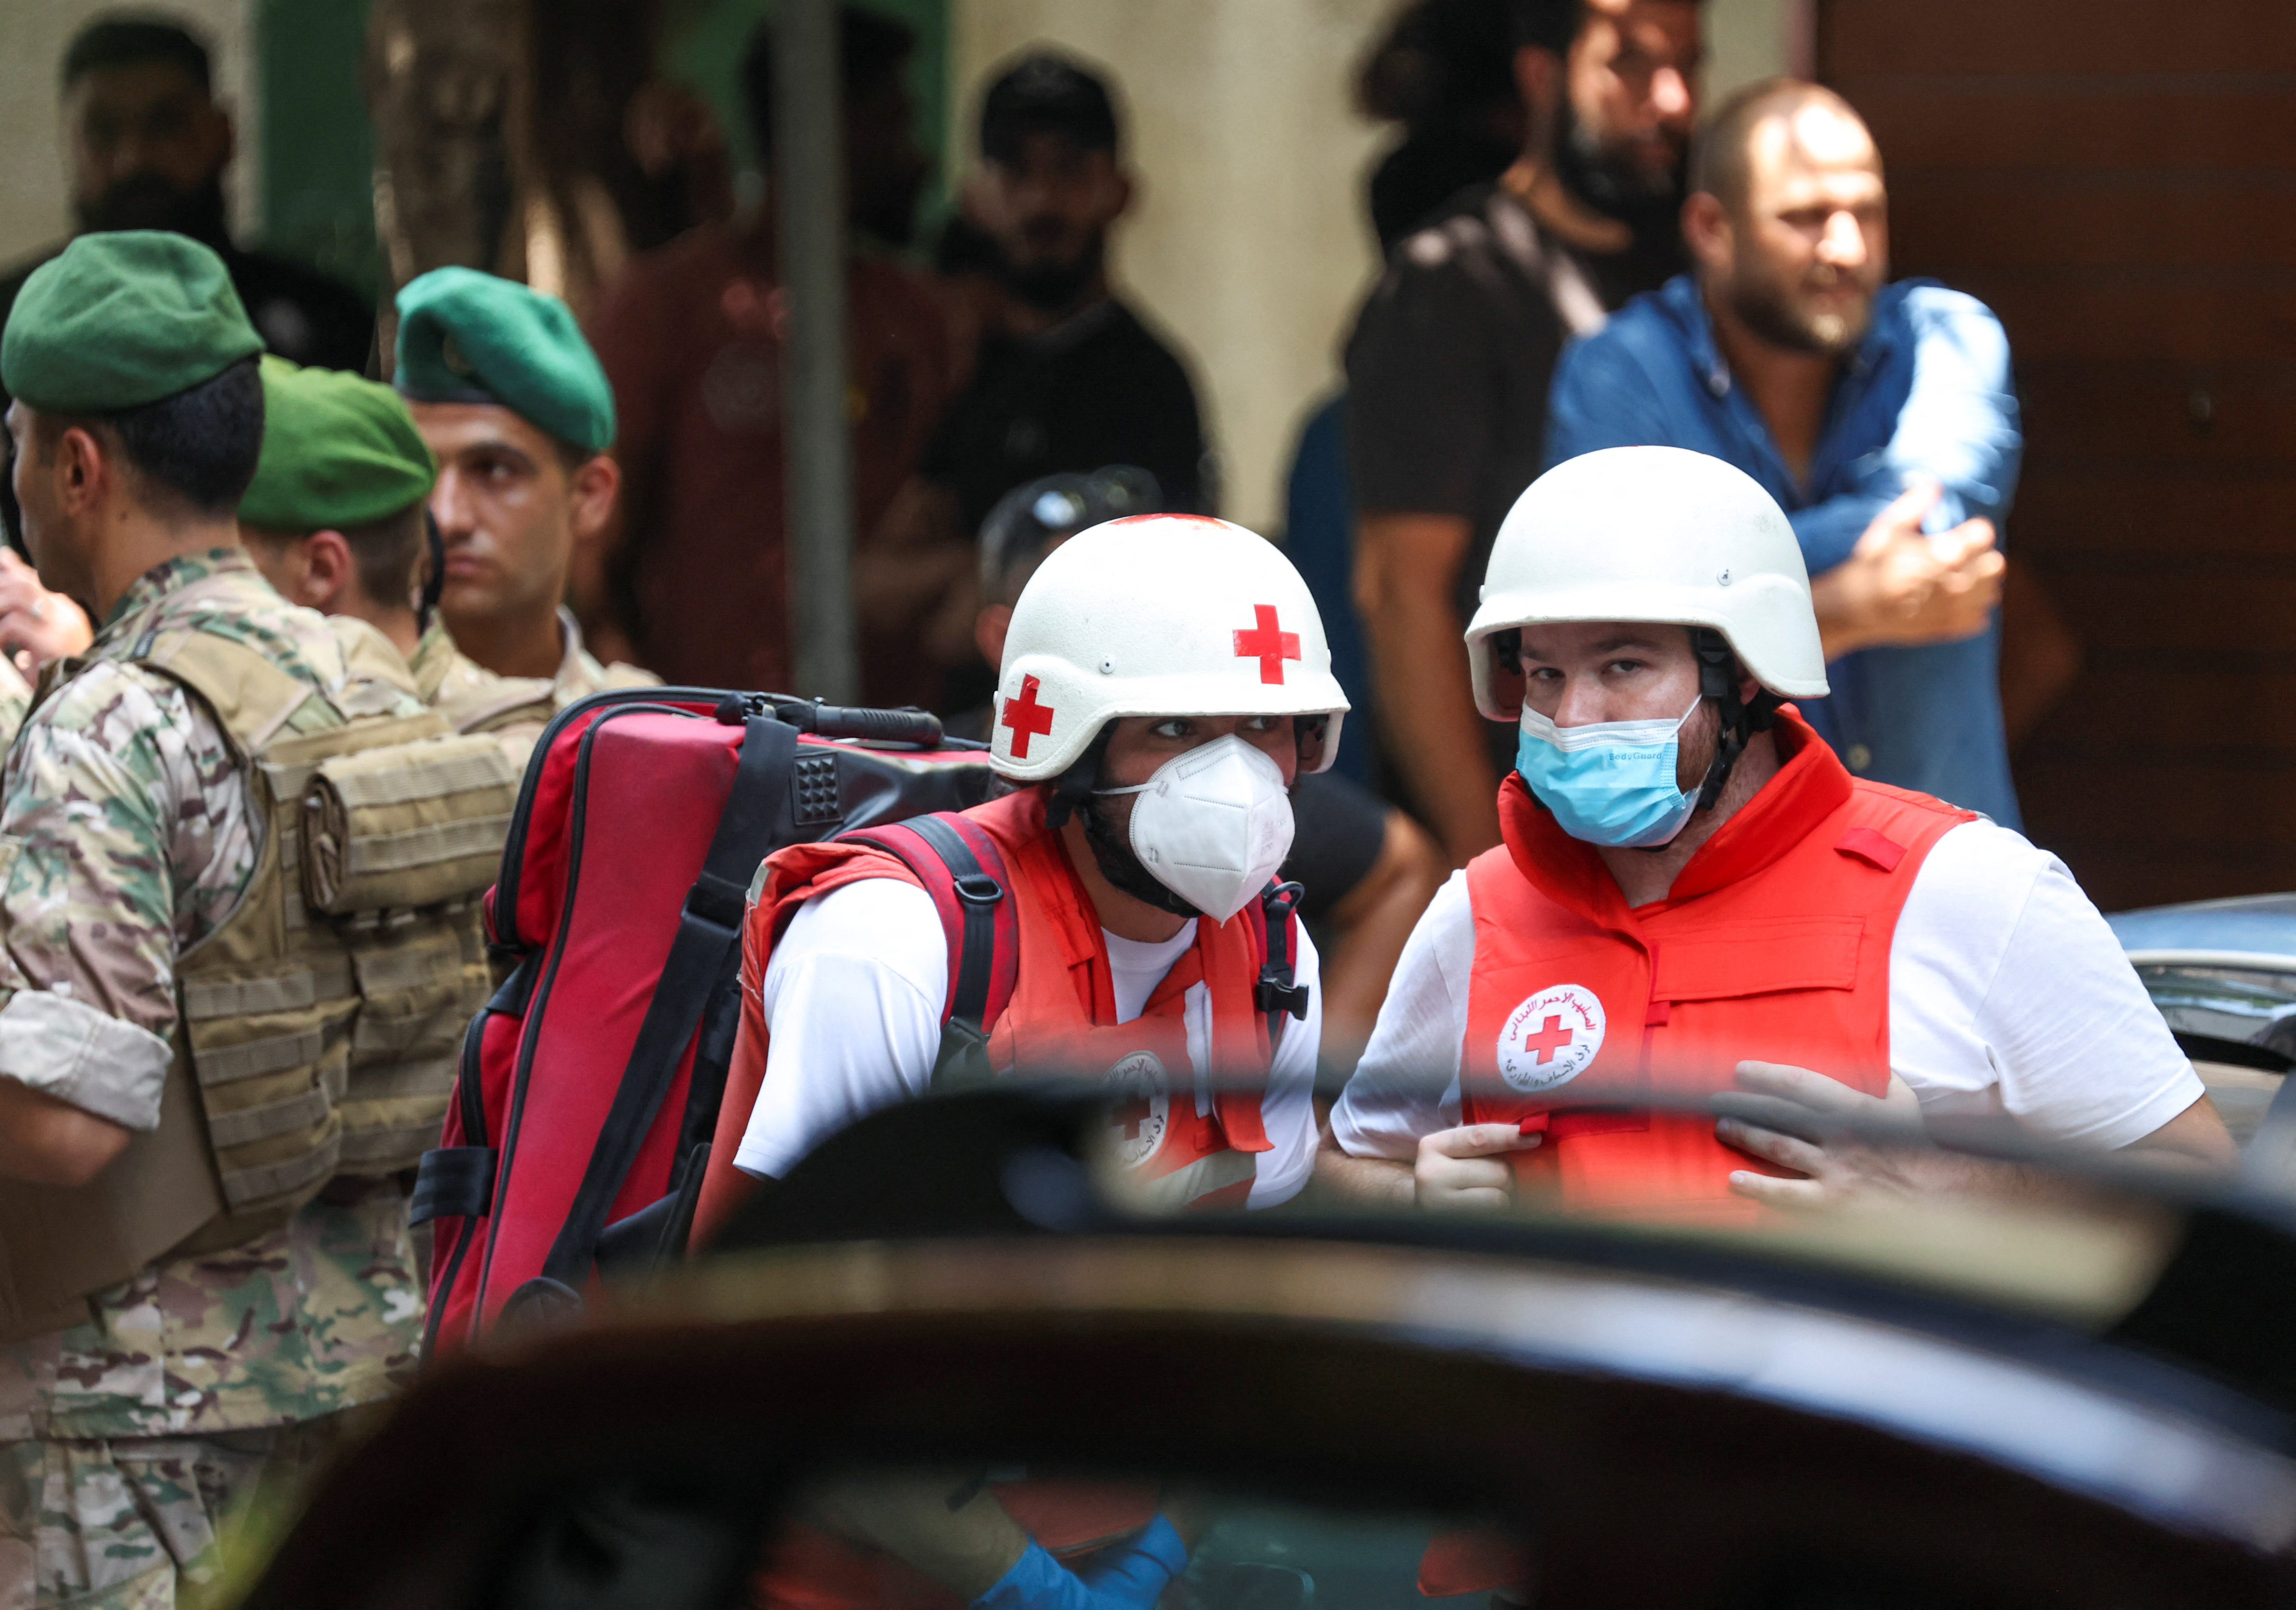 Members of the Red Cross and Emergency Situations are ready to meet people freed by a keeper holding an undetermined number of people hostage (REUTERS / Mohamed Azakir)